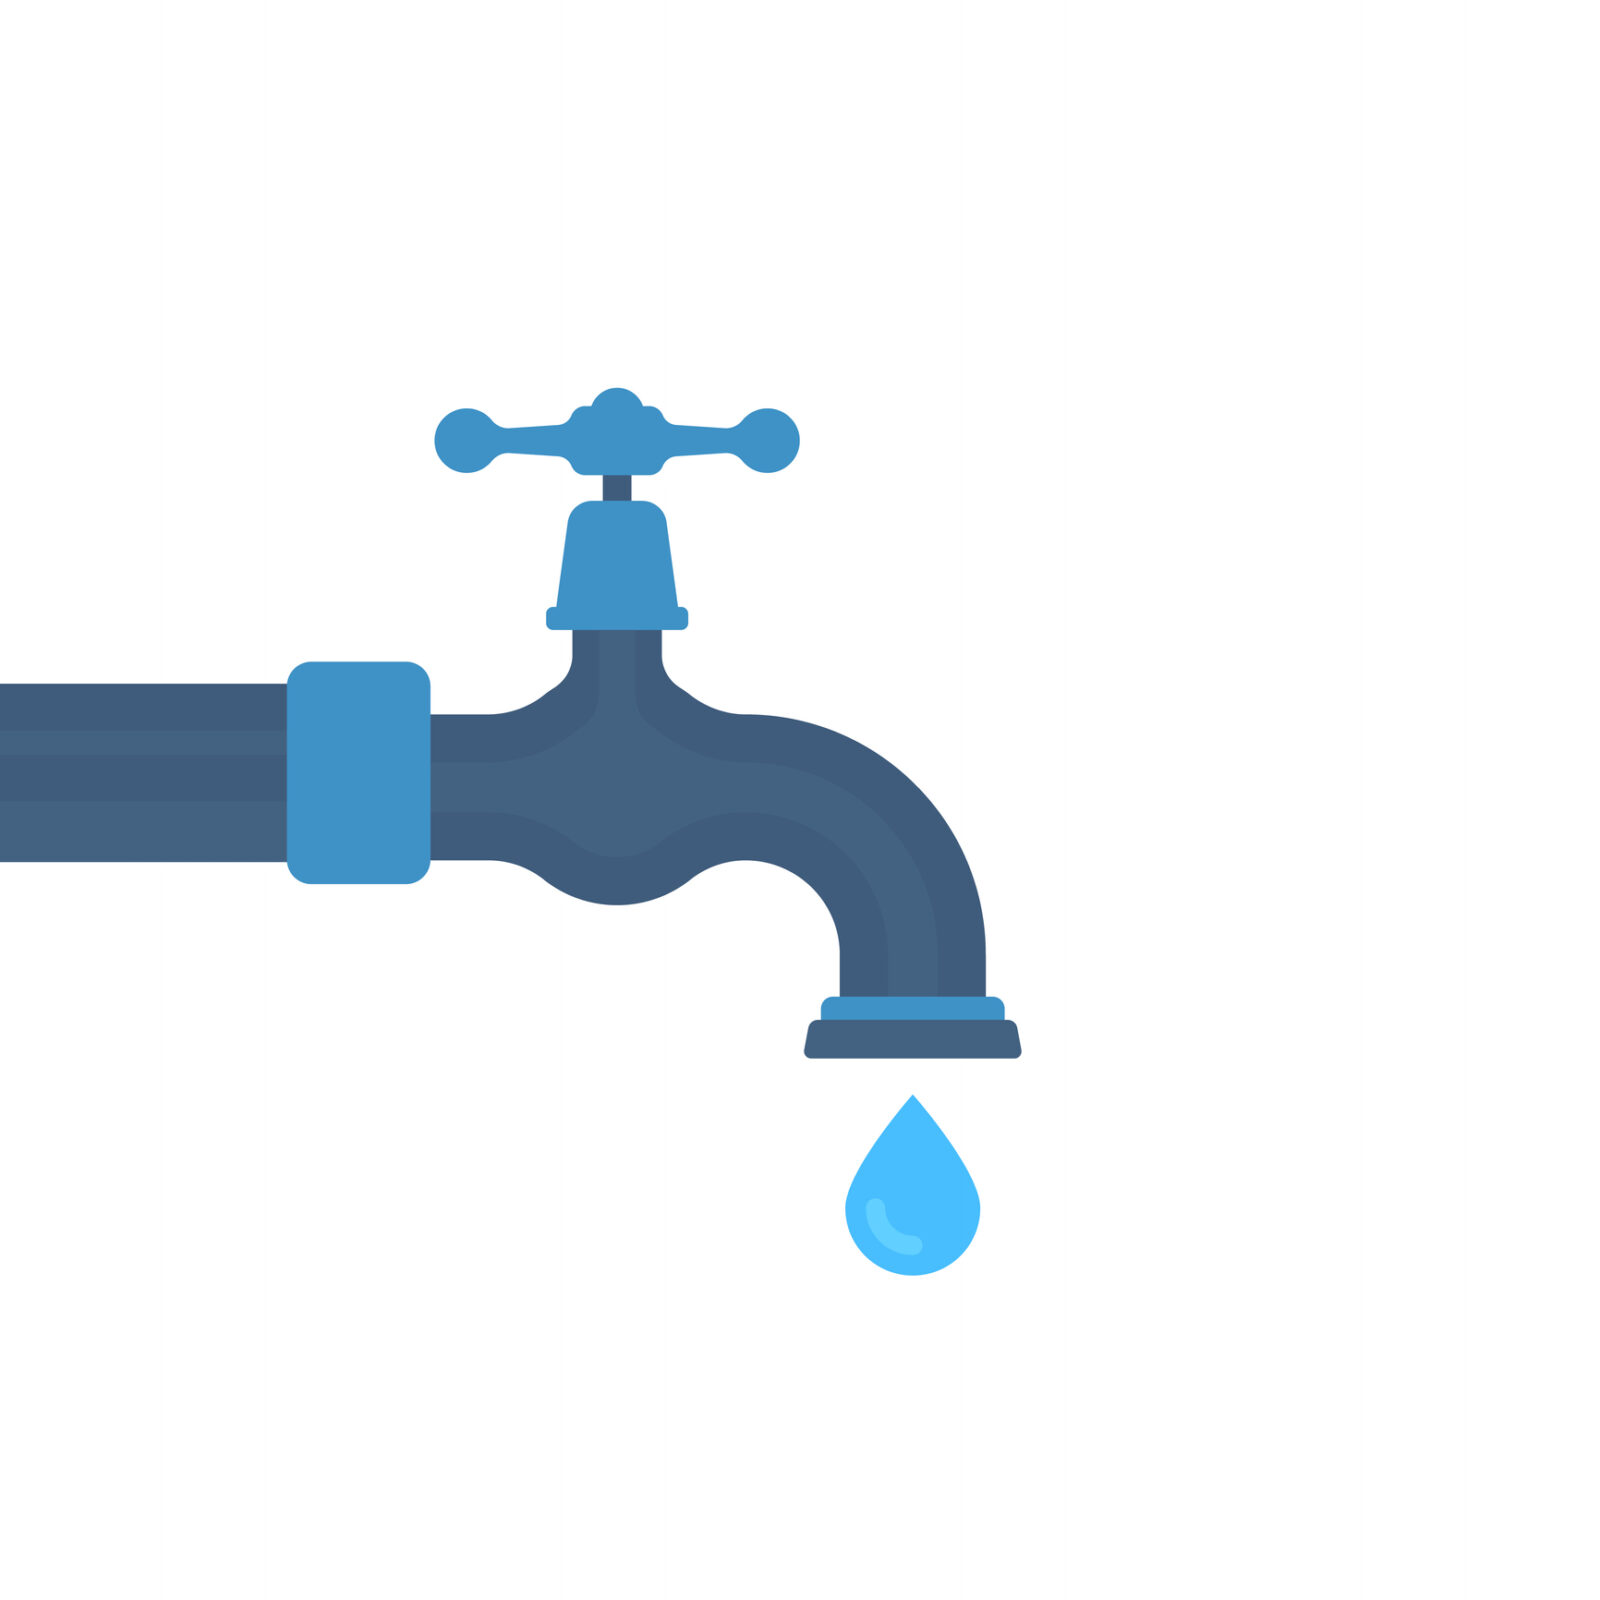 A cartoon image of a tap dripping water for an LCA post on water conservation during the drought watch.